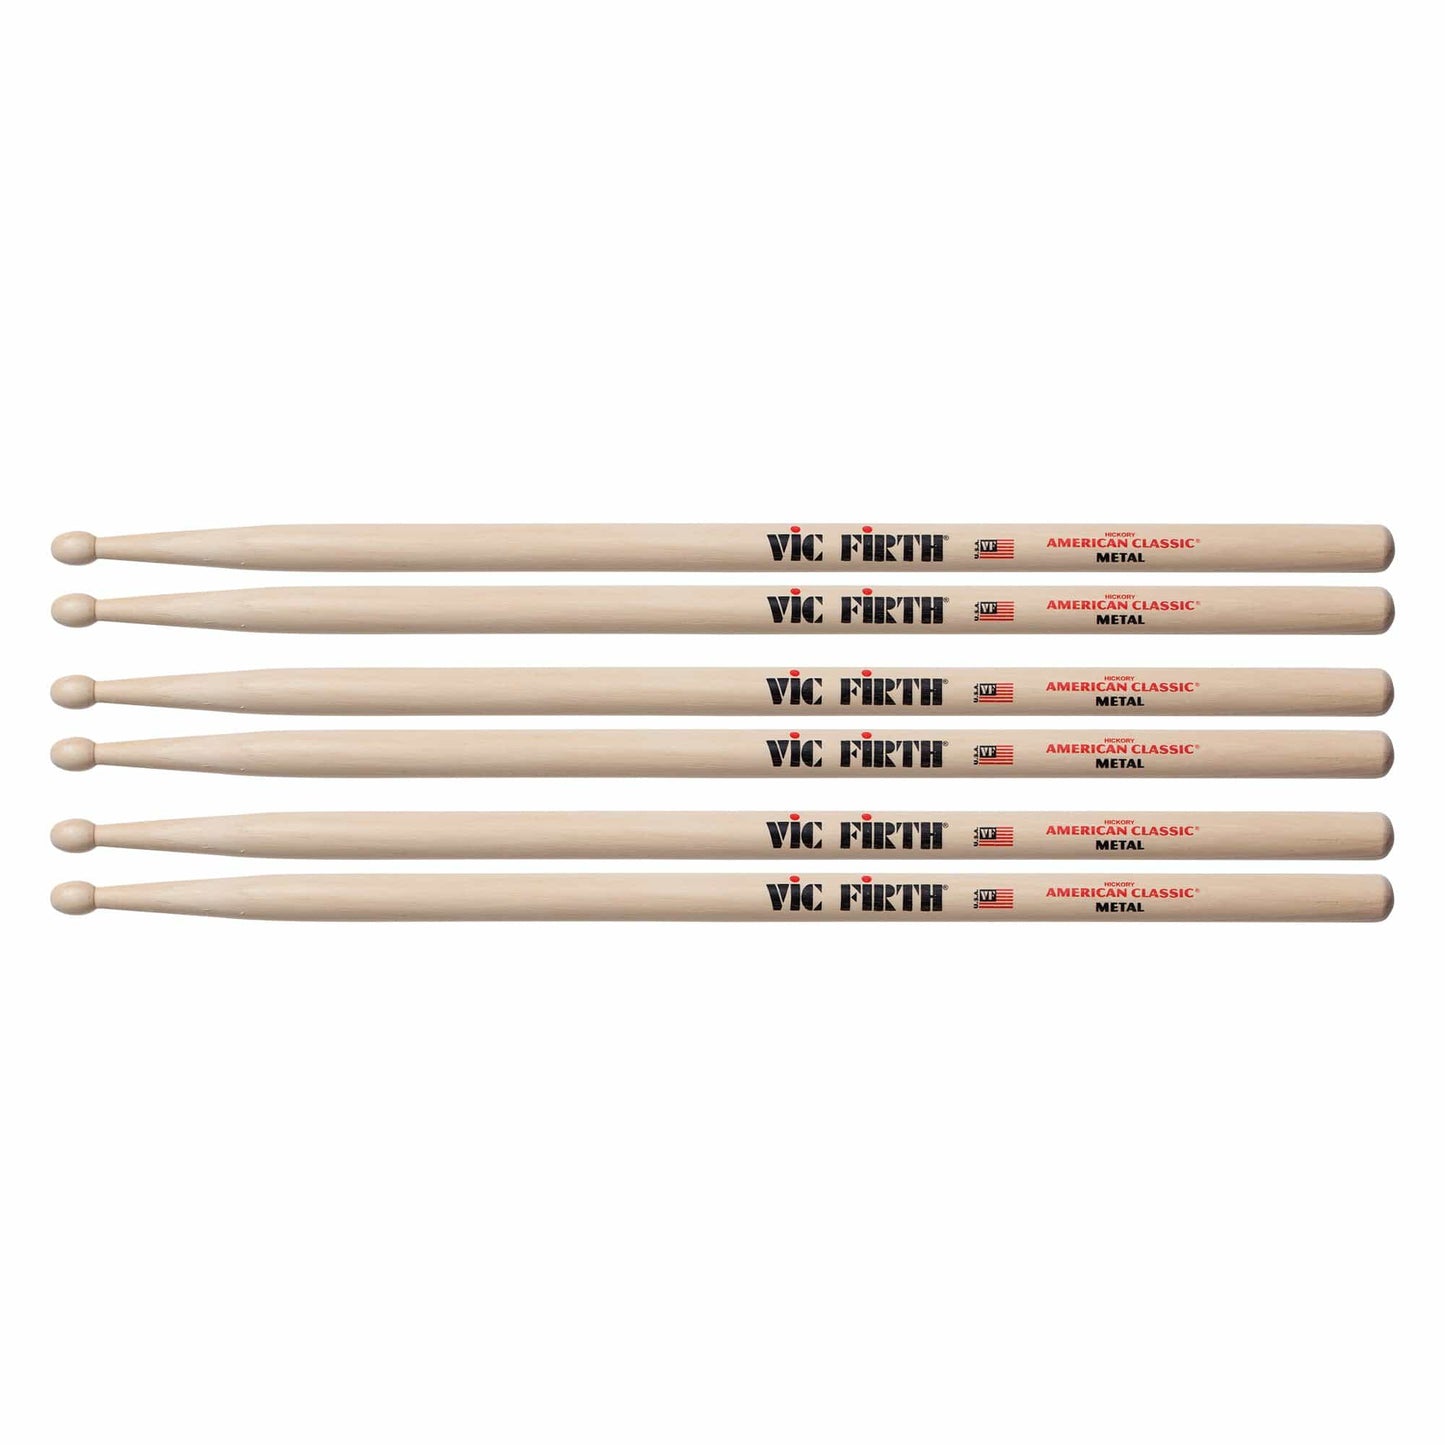 Vic Firth American Classic Metal Wood Tip Drum Sticks (3 Pair Bundle) Drums and Percussion / Parts and Accessories / Drum Sticks and Mallets